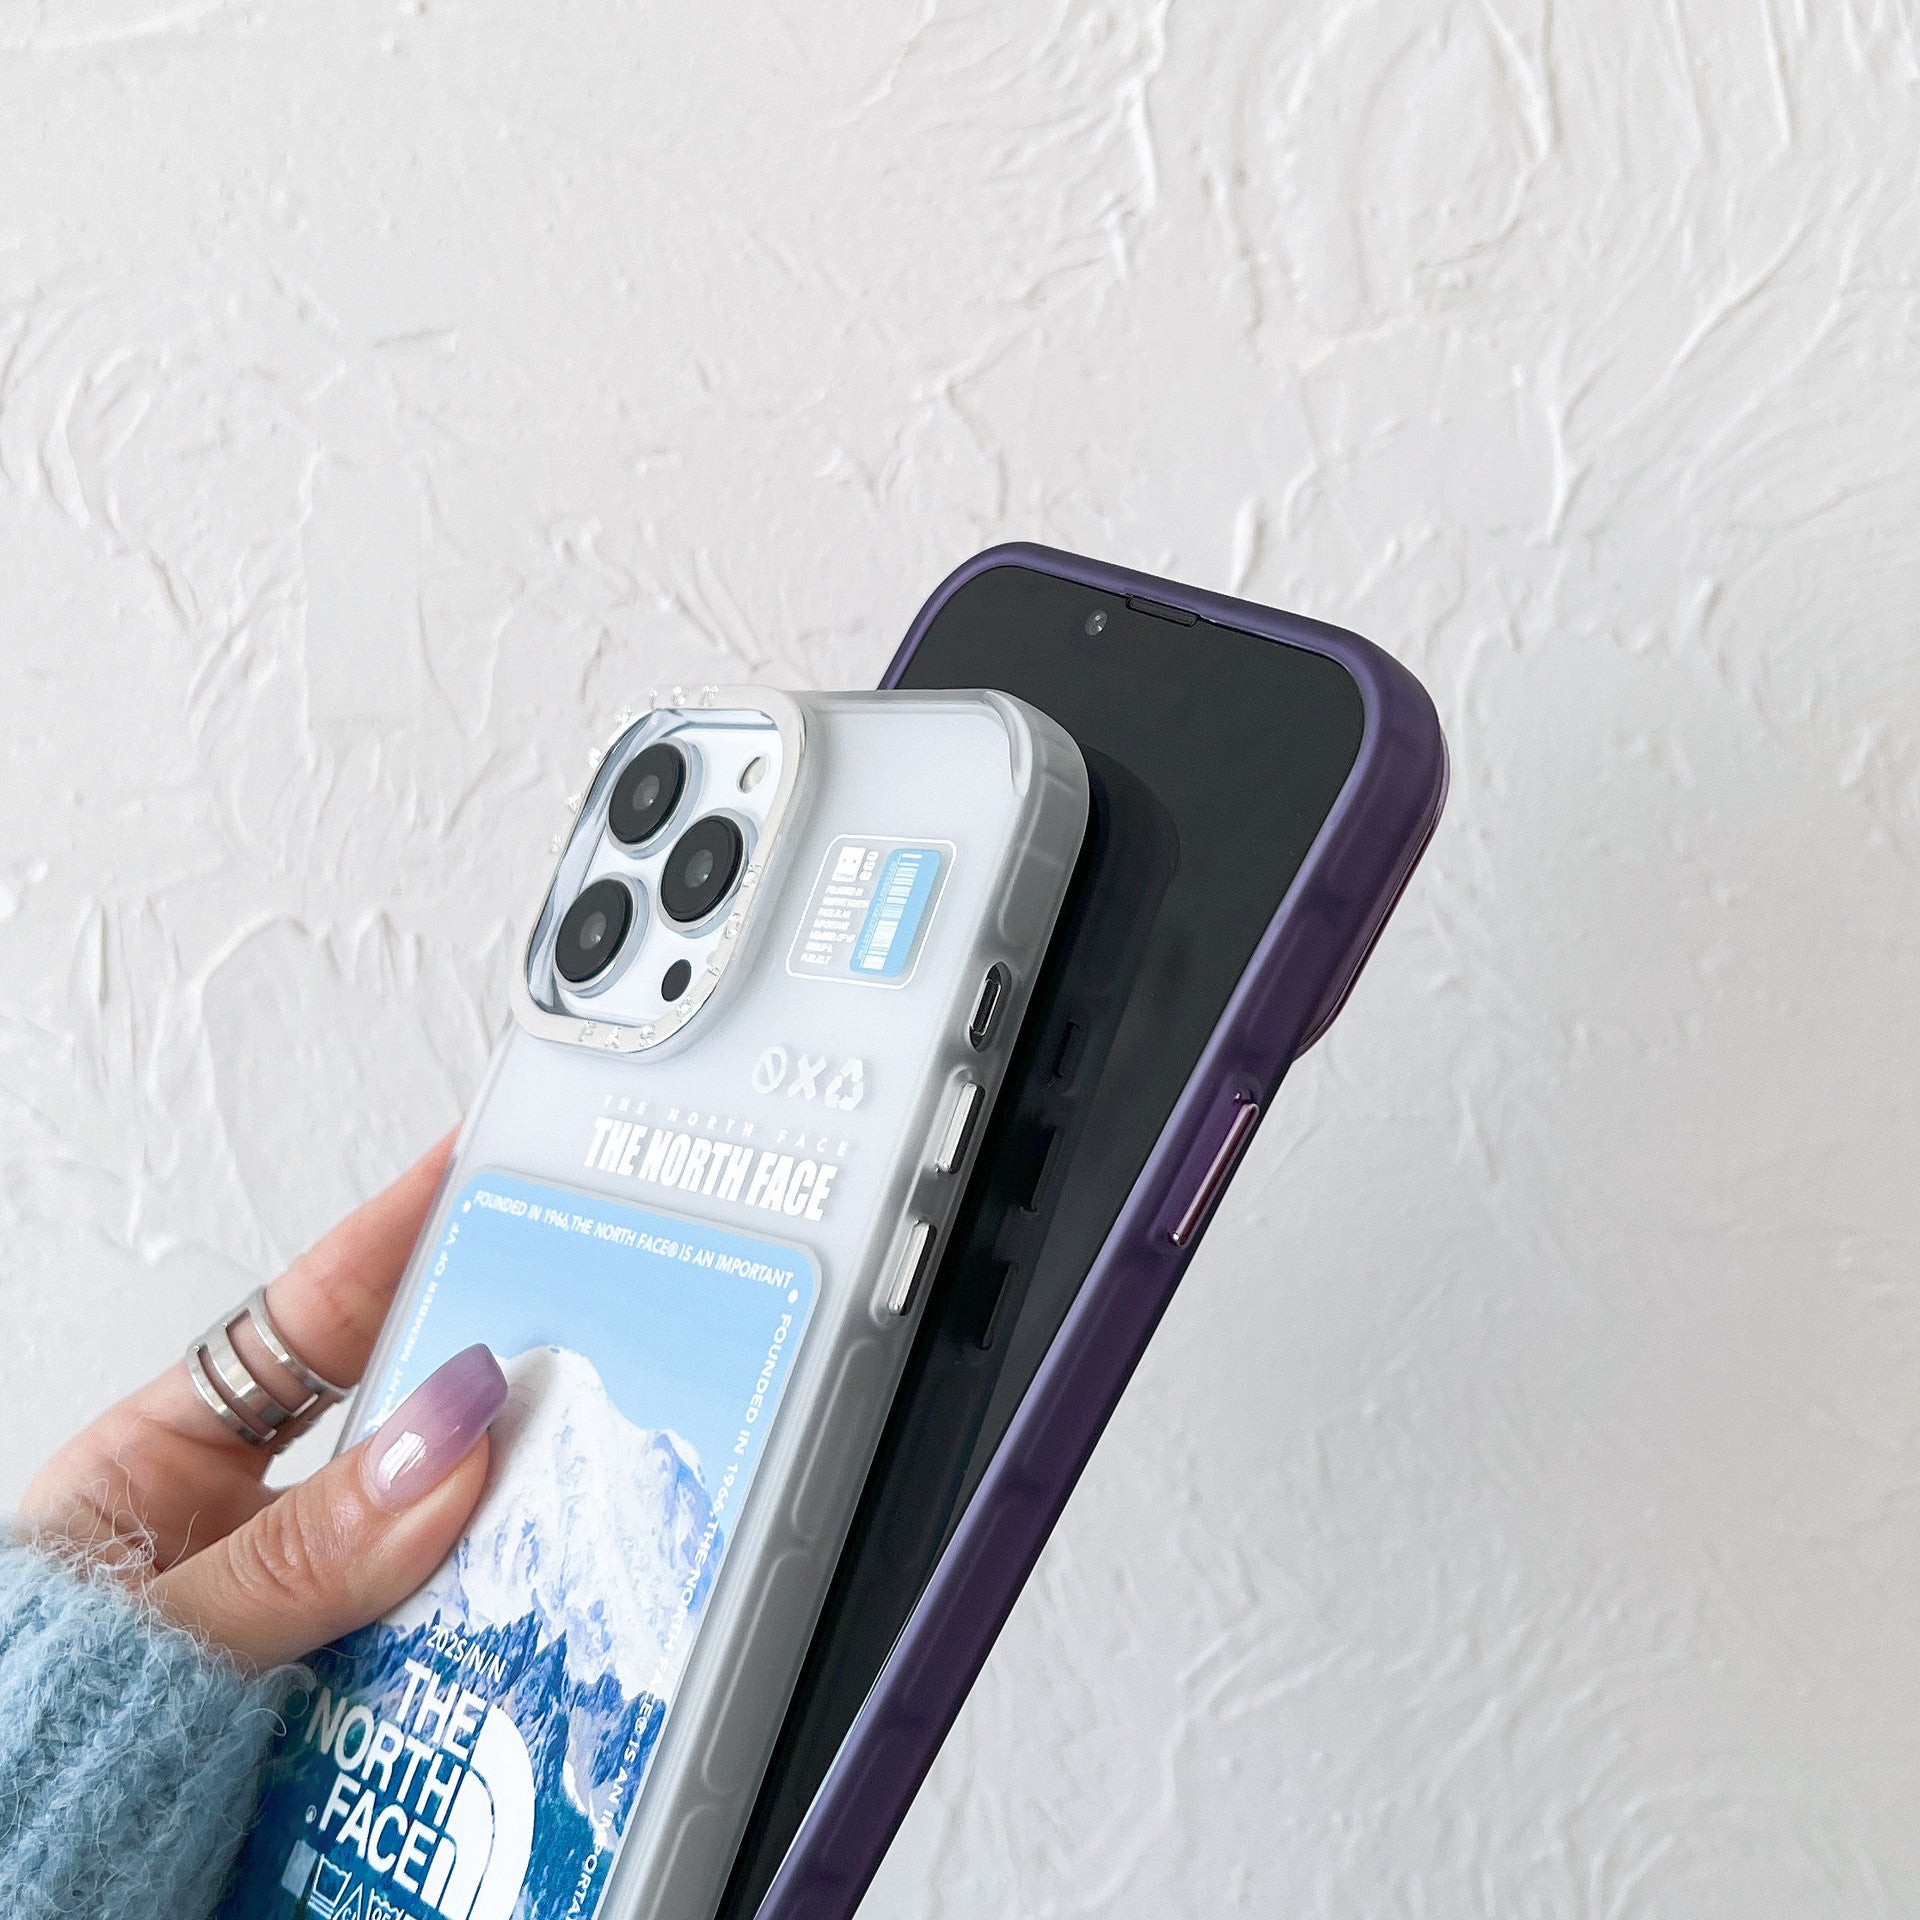 North Face Mountain iPhone Case